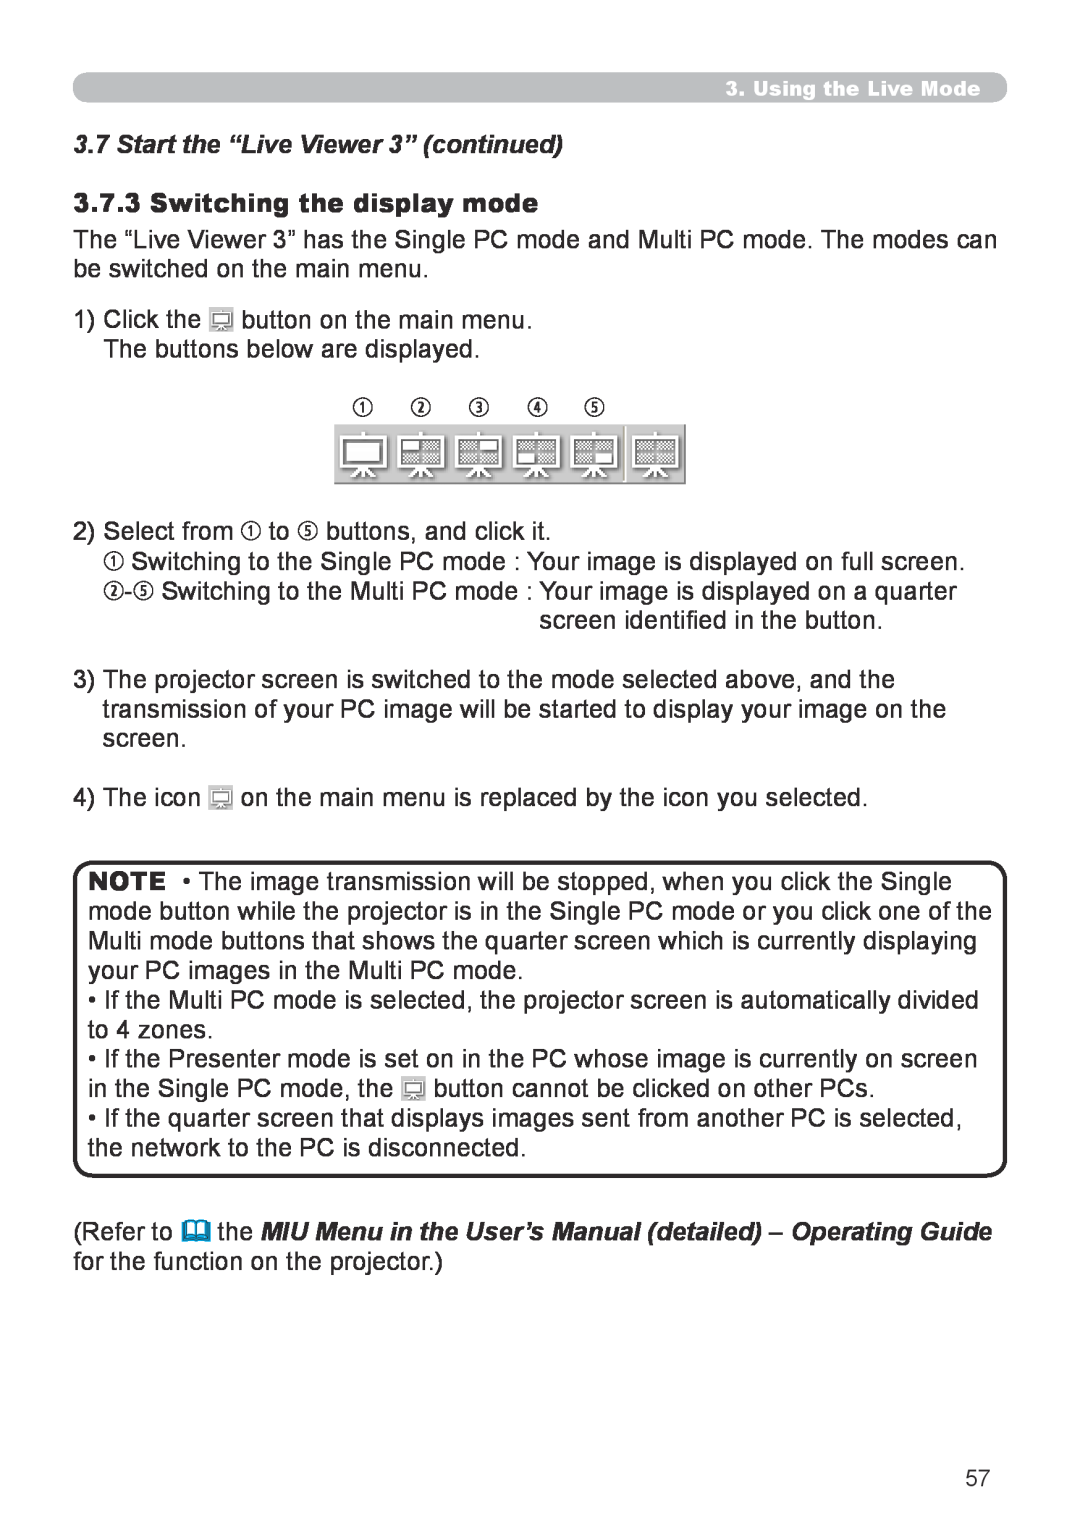 Hitachi CP-X267 user manual Switching the display mode, Start the “Live Viewer 3” continued 